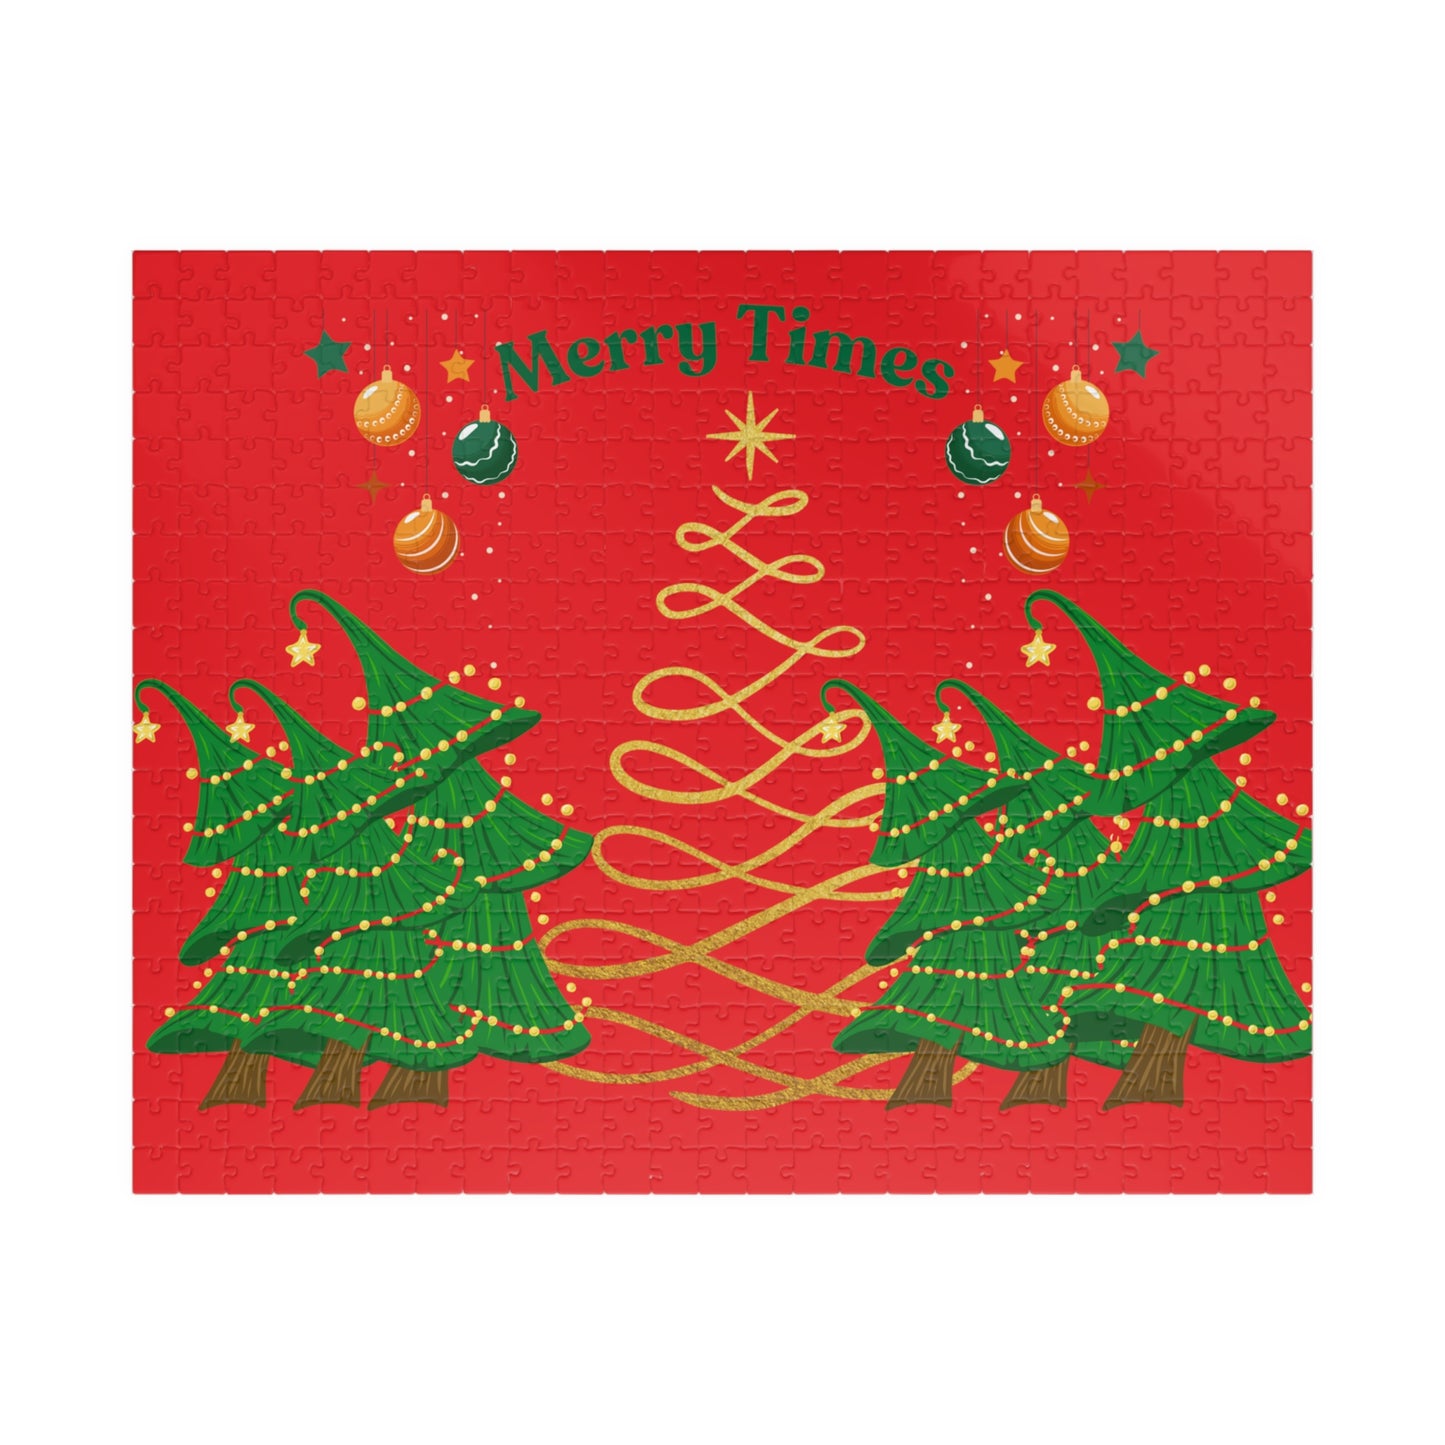 Merry Times | Puzzle (110, 252, 500, 1014-piece)